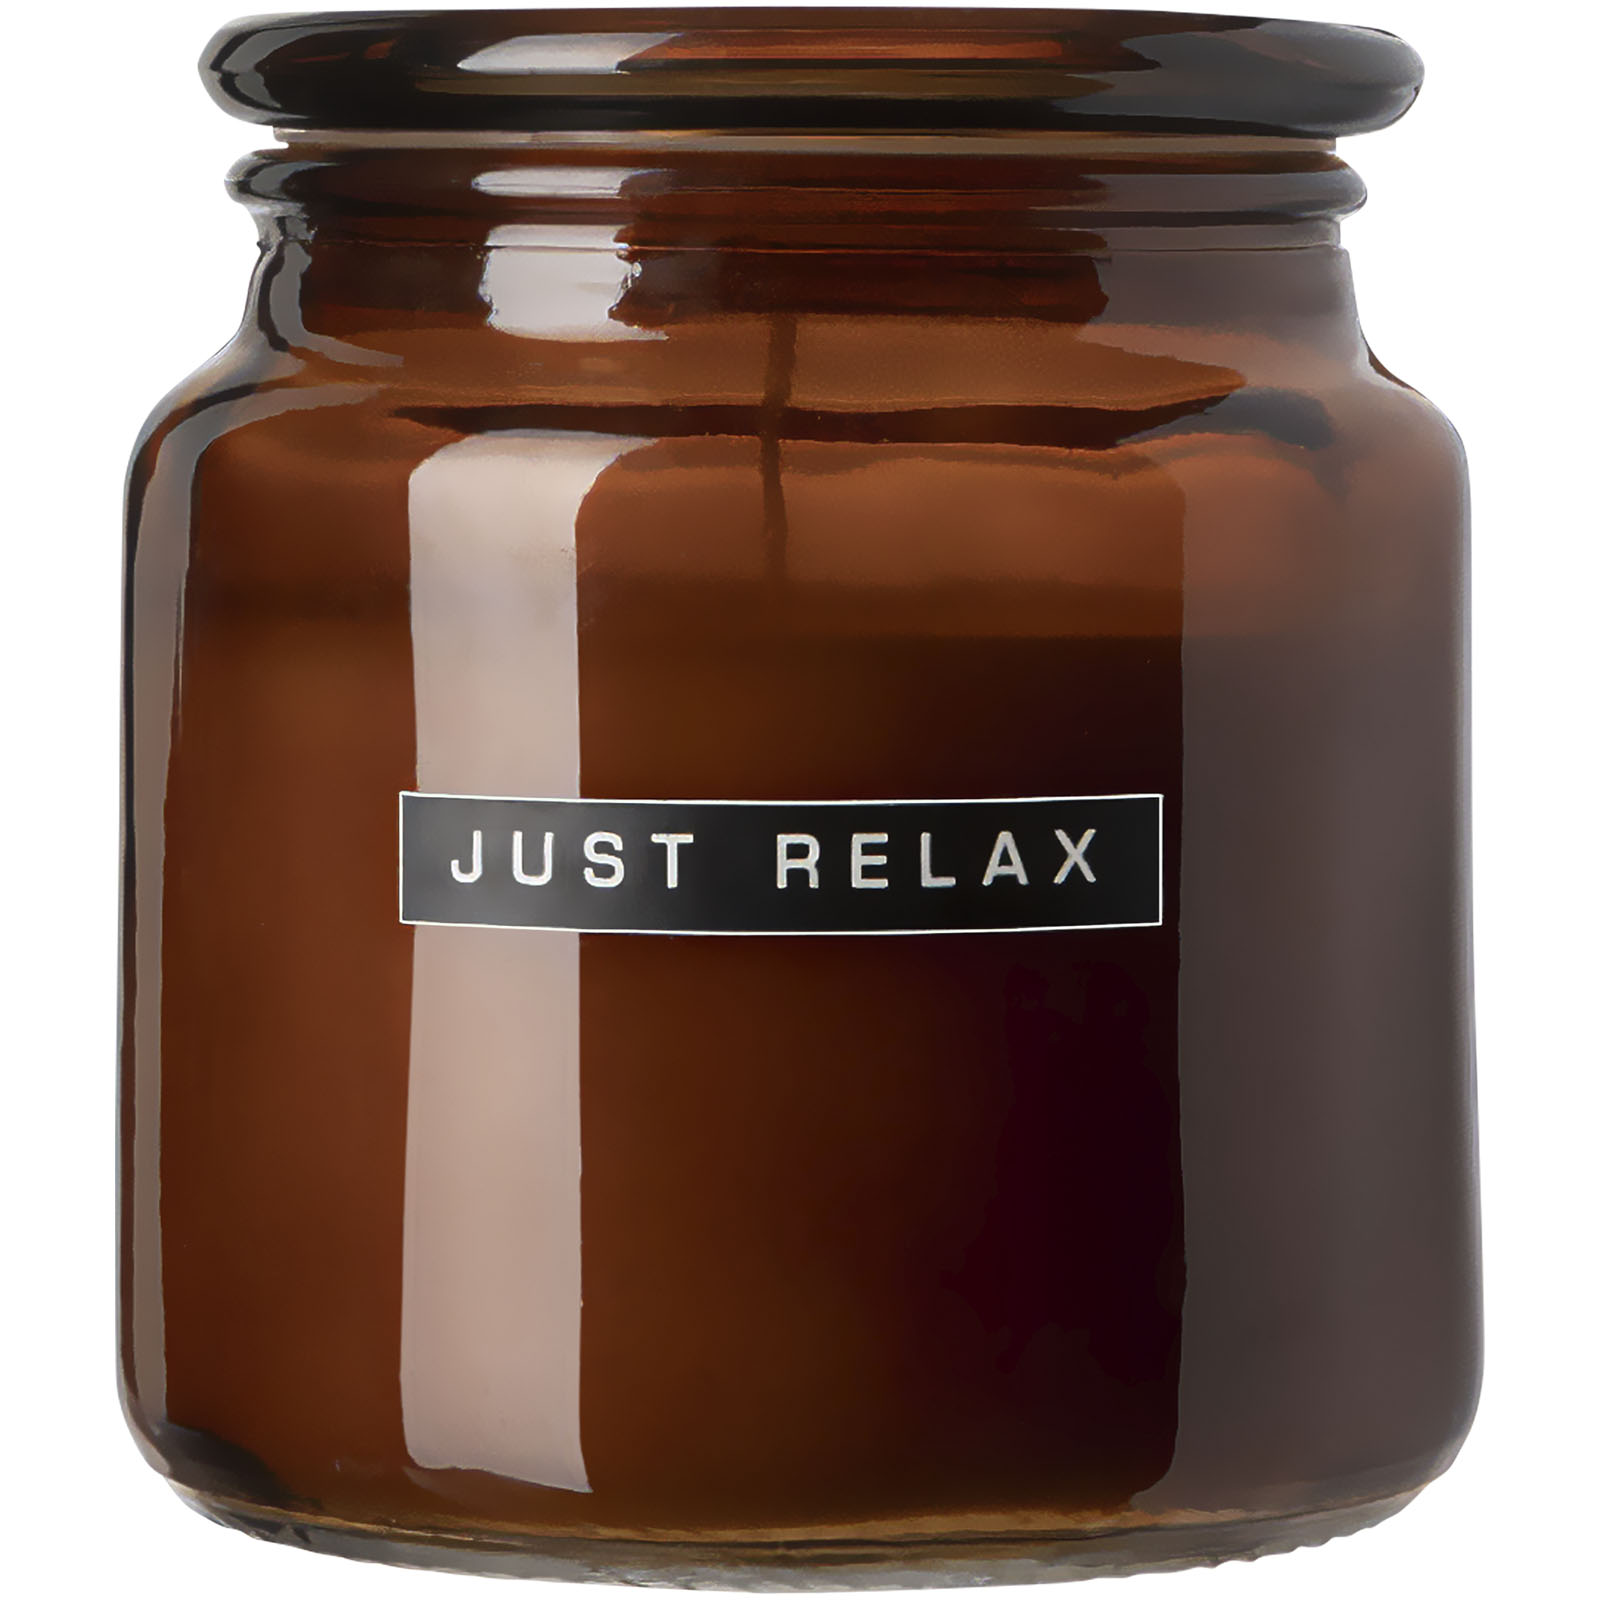 Advertising Personal Care - Wellmark Let's Get Cozy 650 g scented candle - cedar wood fragrance